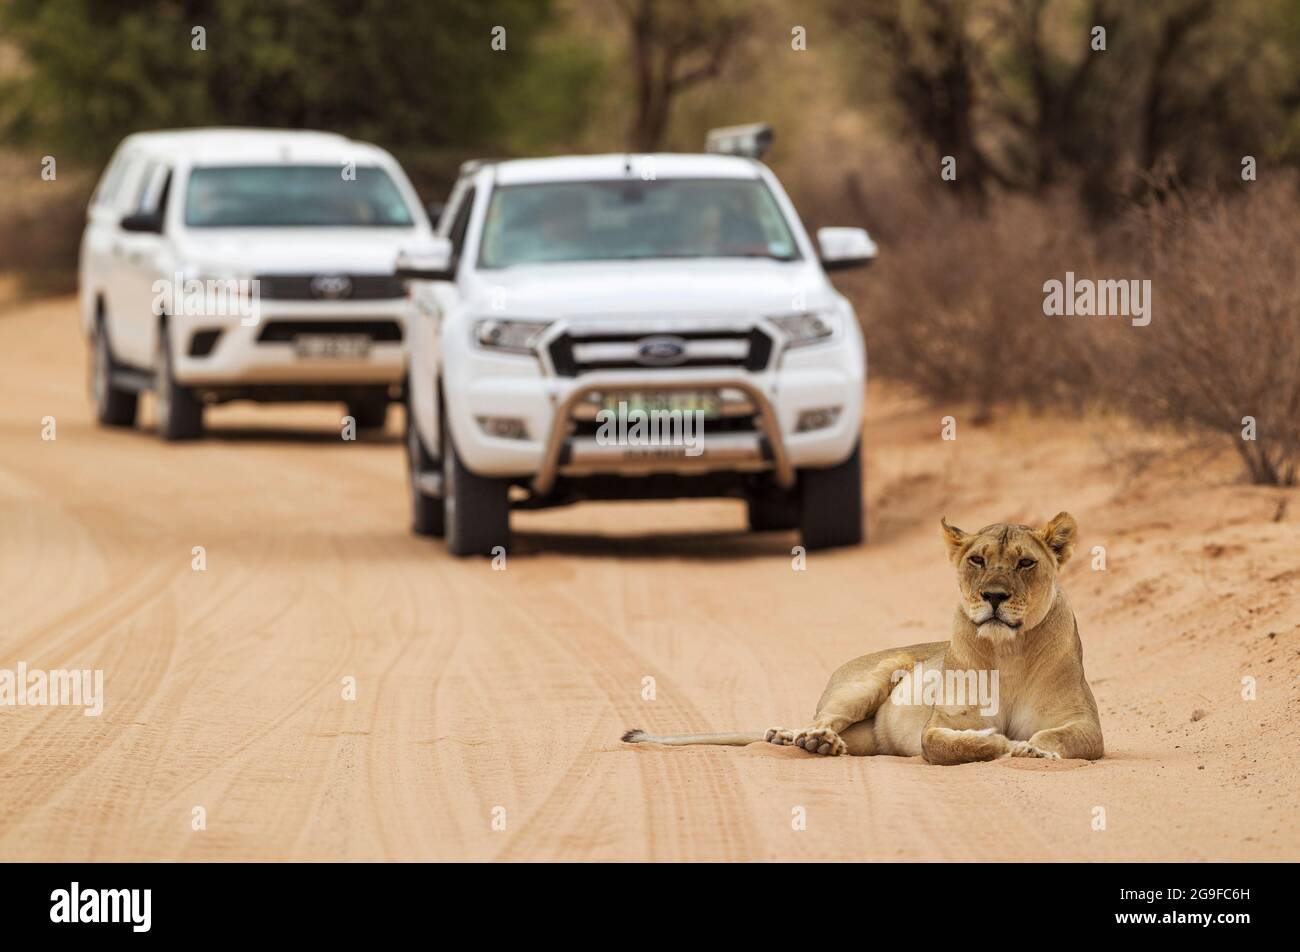 Lion (Panthera leo). Female resting on a road. Behind it tourist vehicles on a game drive. Kalahari Desert, Kgalagadi Transfrontier Park, South Africa. Stock Photo